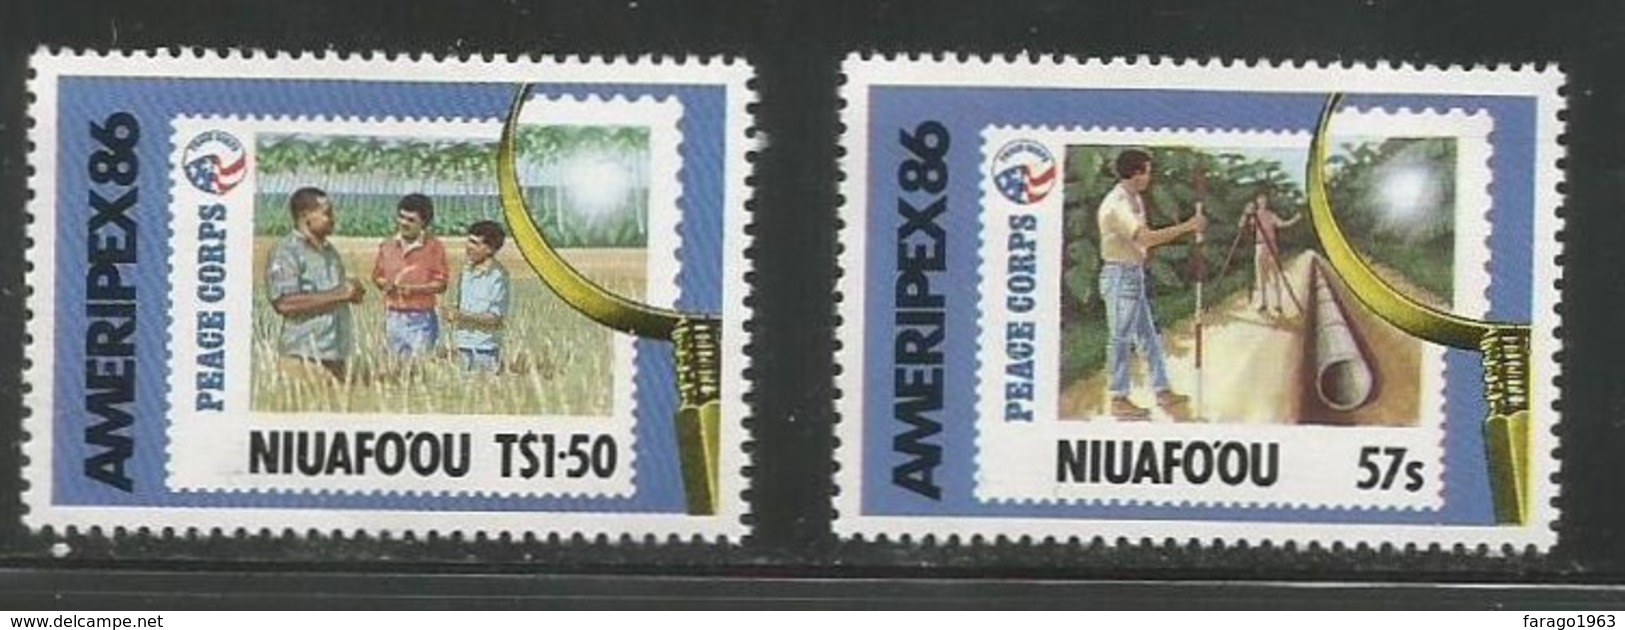 1986 Tonga  Niuafo'ou Ameripex Peace Corps Surveying Agriculture  Stamp On Stamp Complete Set Of 2 MNH - Tonga (1970-...)